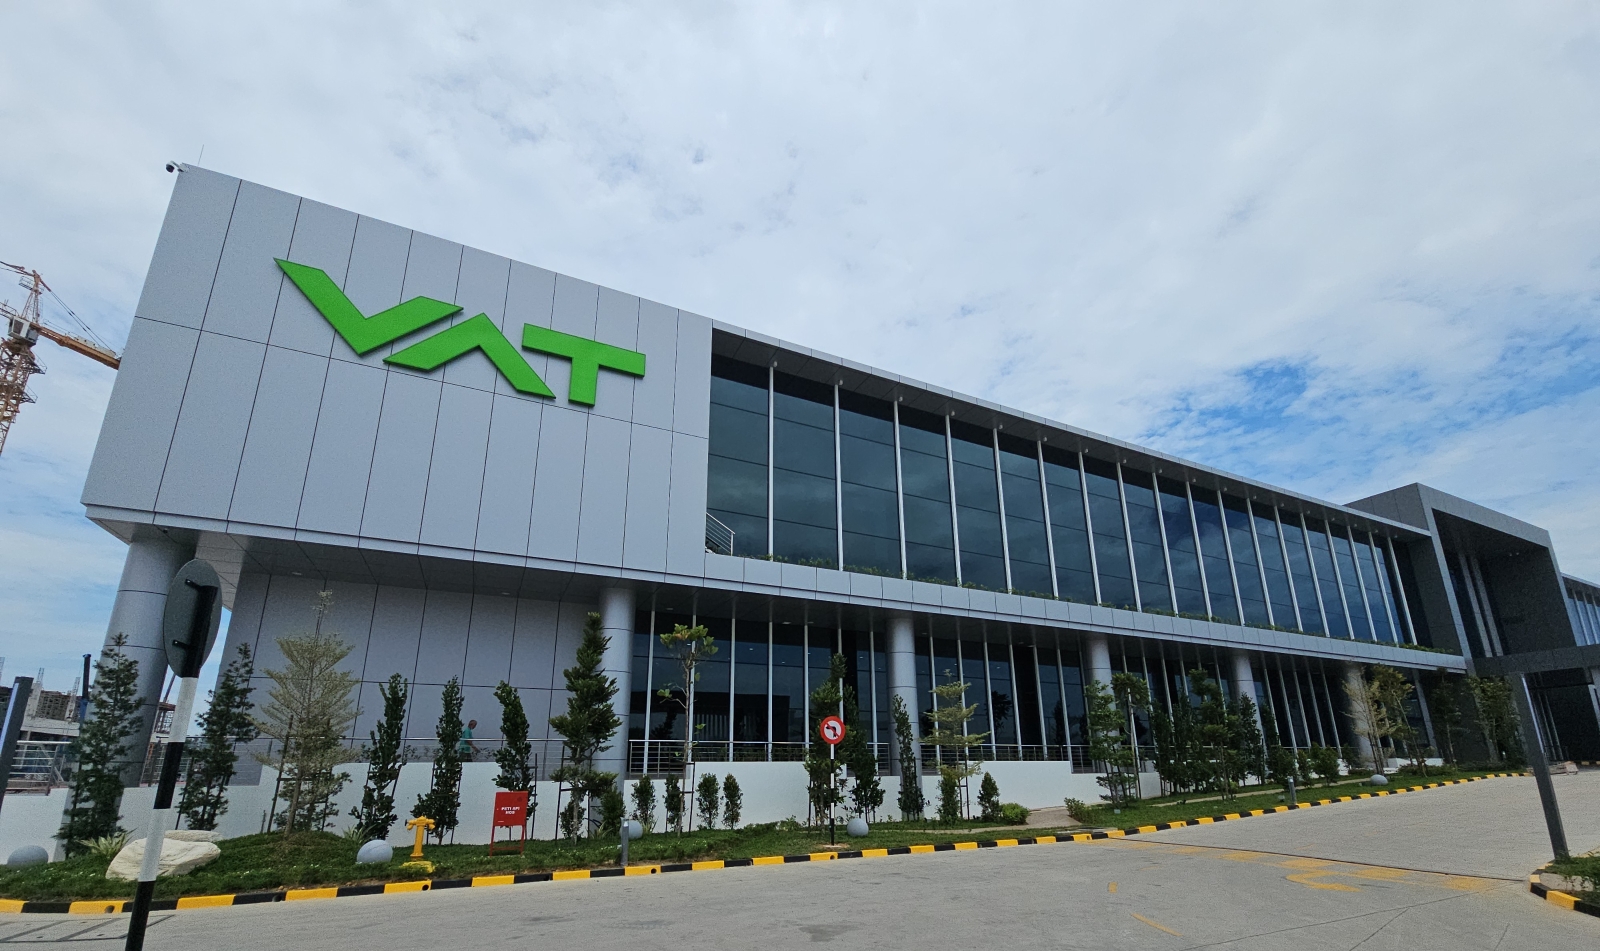 VAT offices and manufacturing facilities in Malaysia